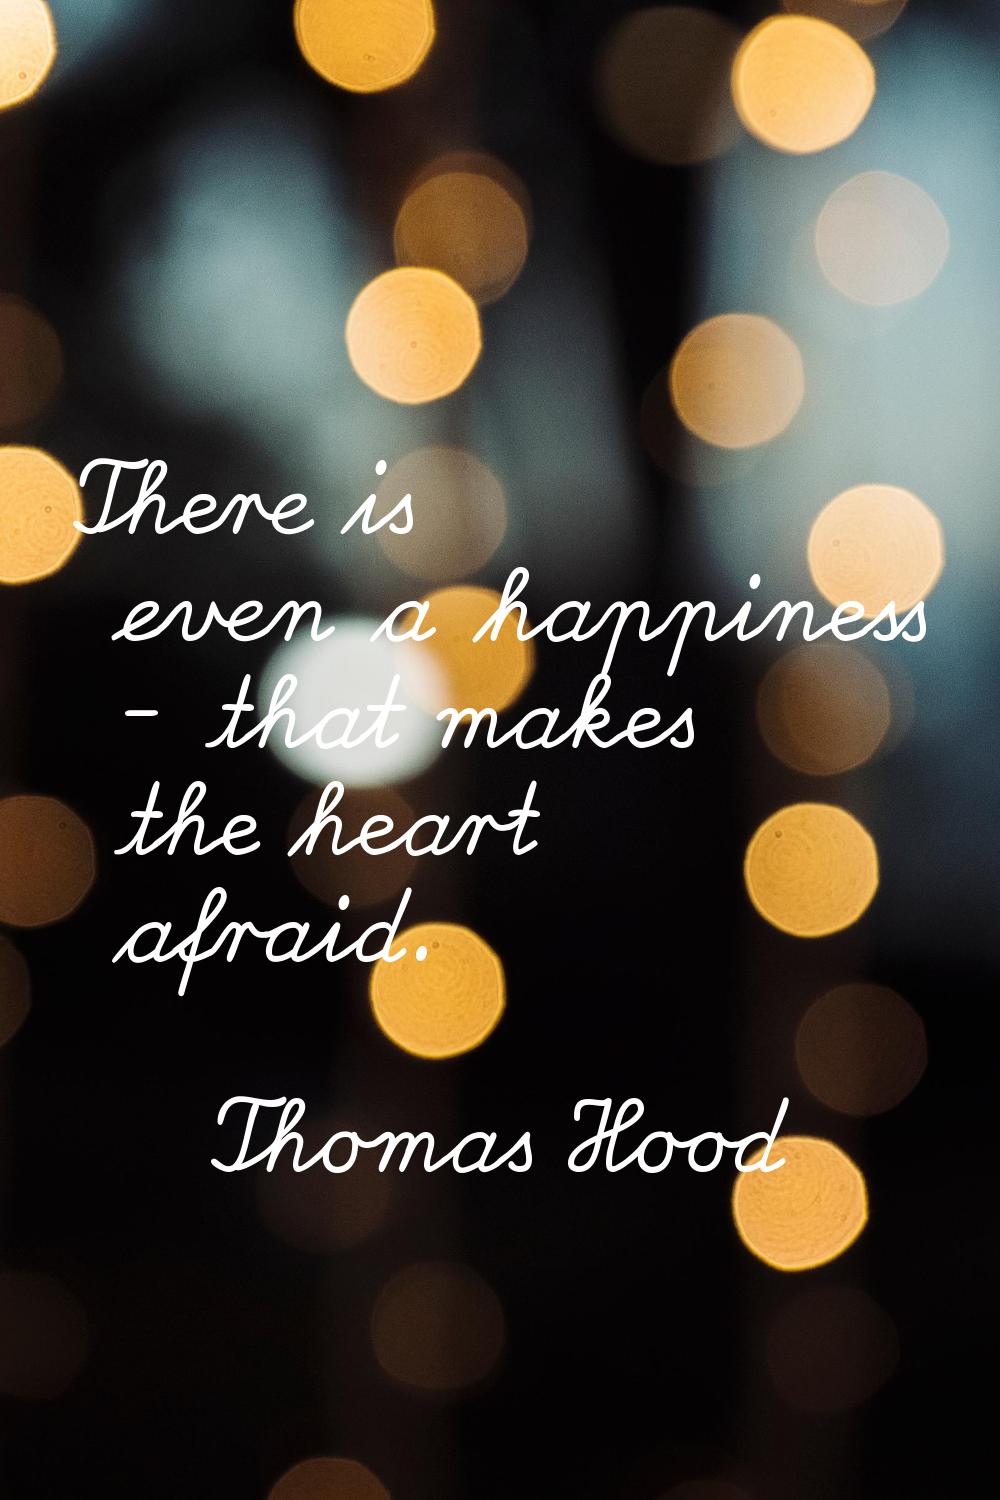 There is even a happiness - that makes the heart afraid.